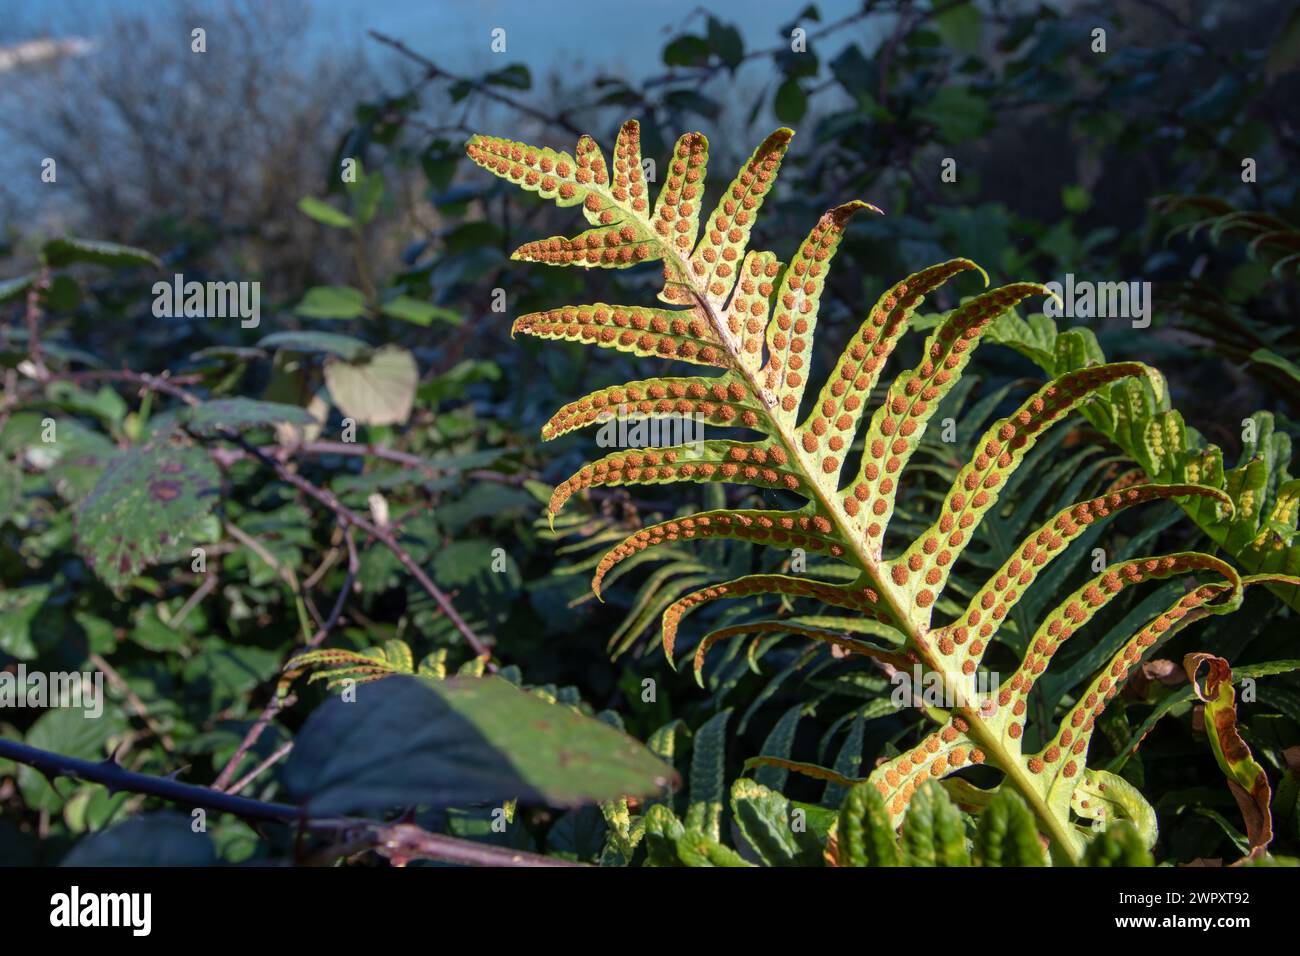 Polypodium vulgare for common polypody fern frond with round bright orange sori on the underside. Stock Photo